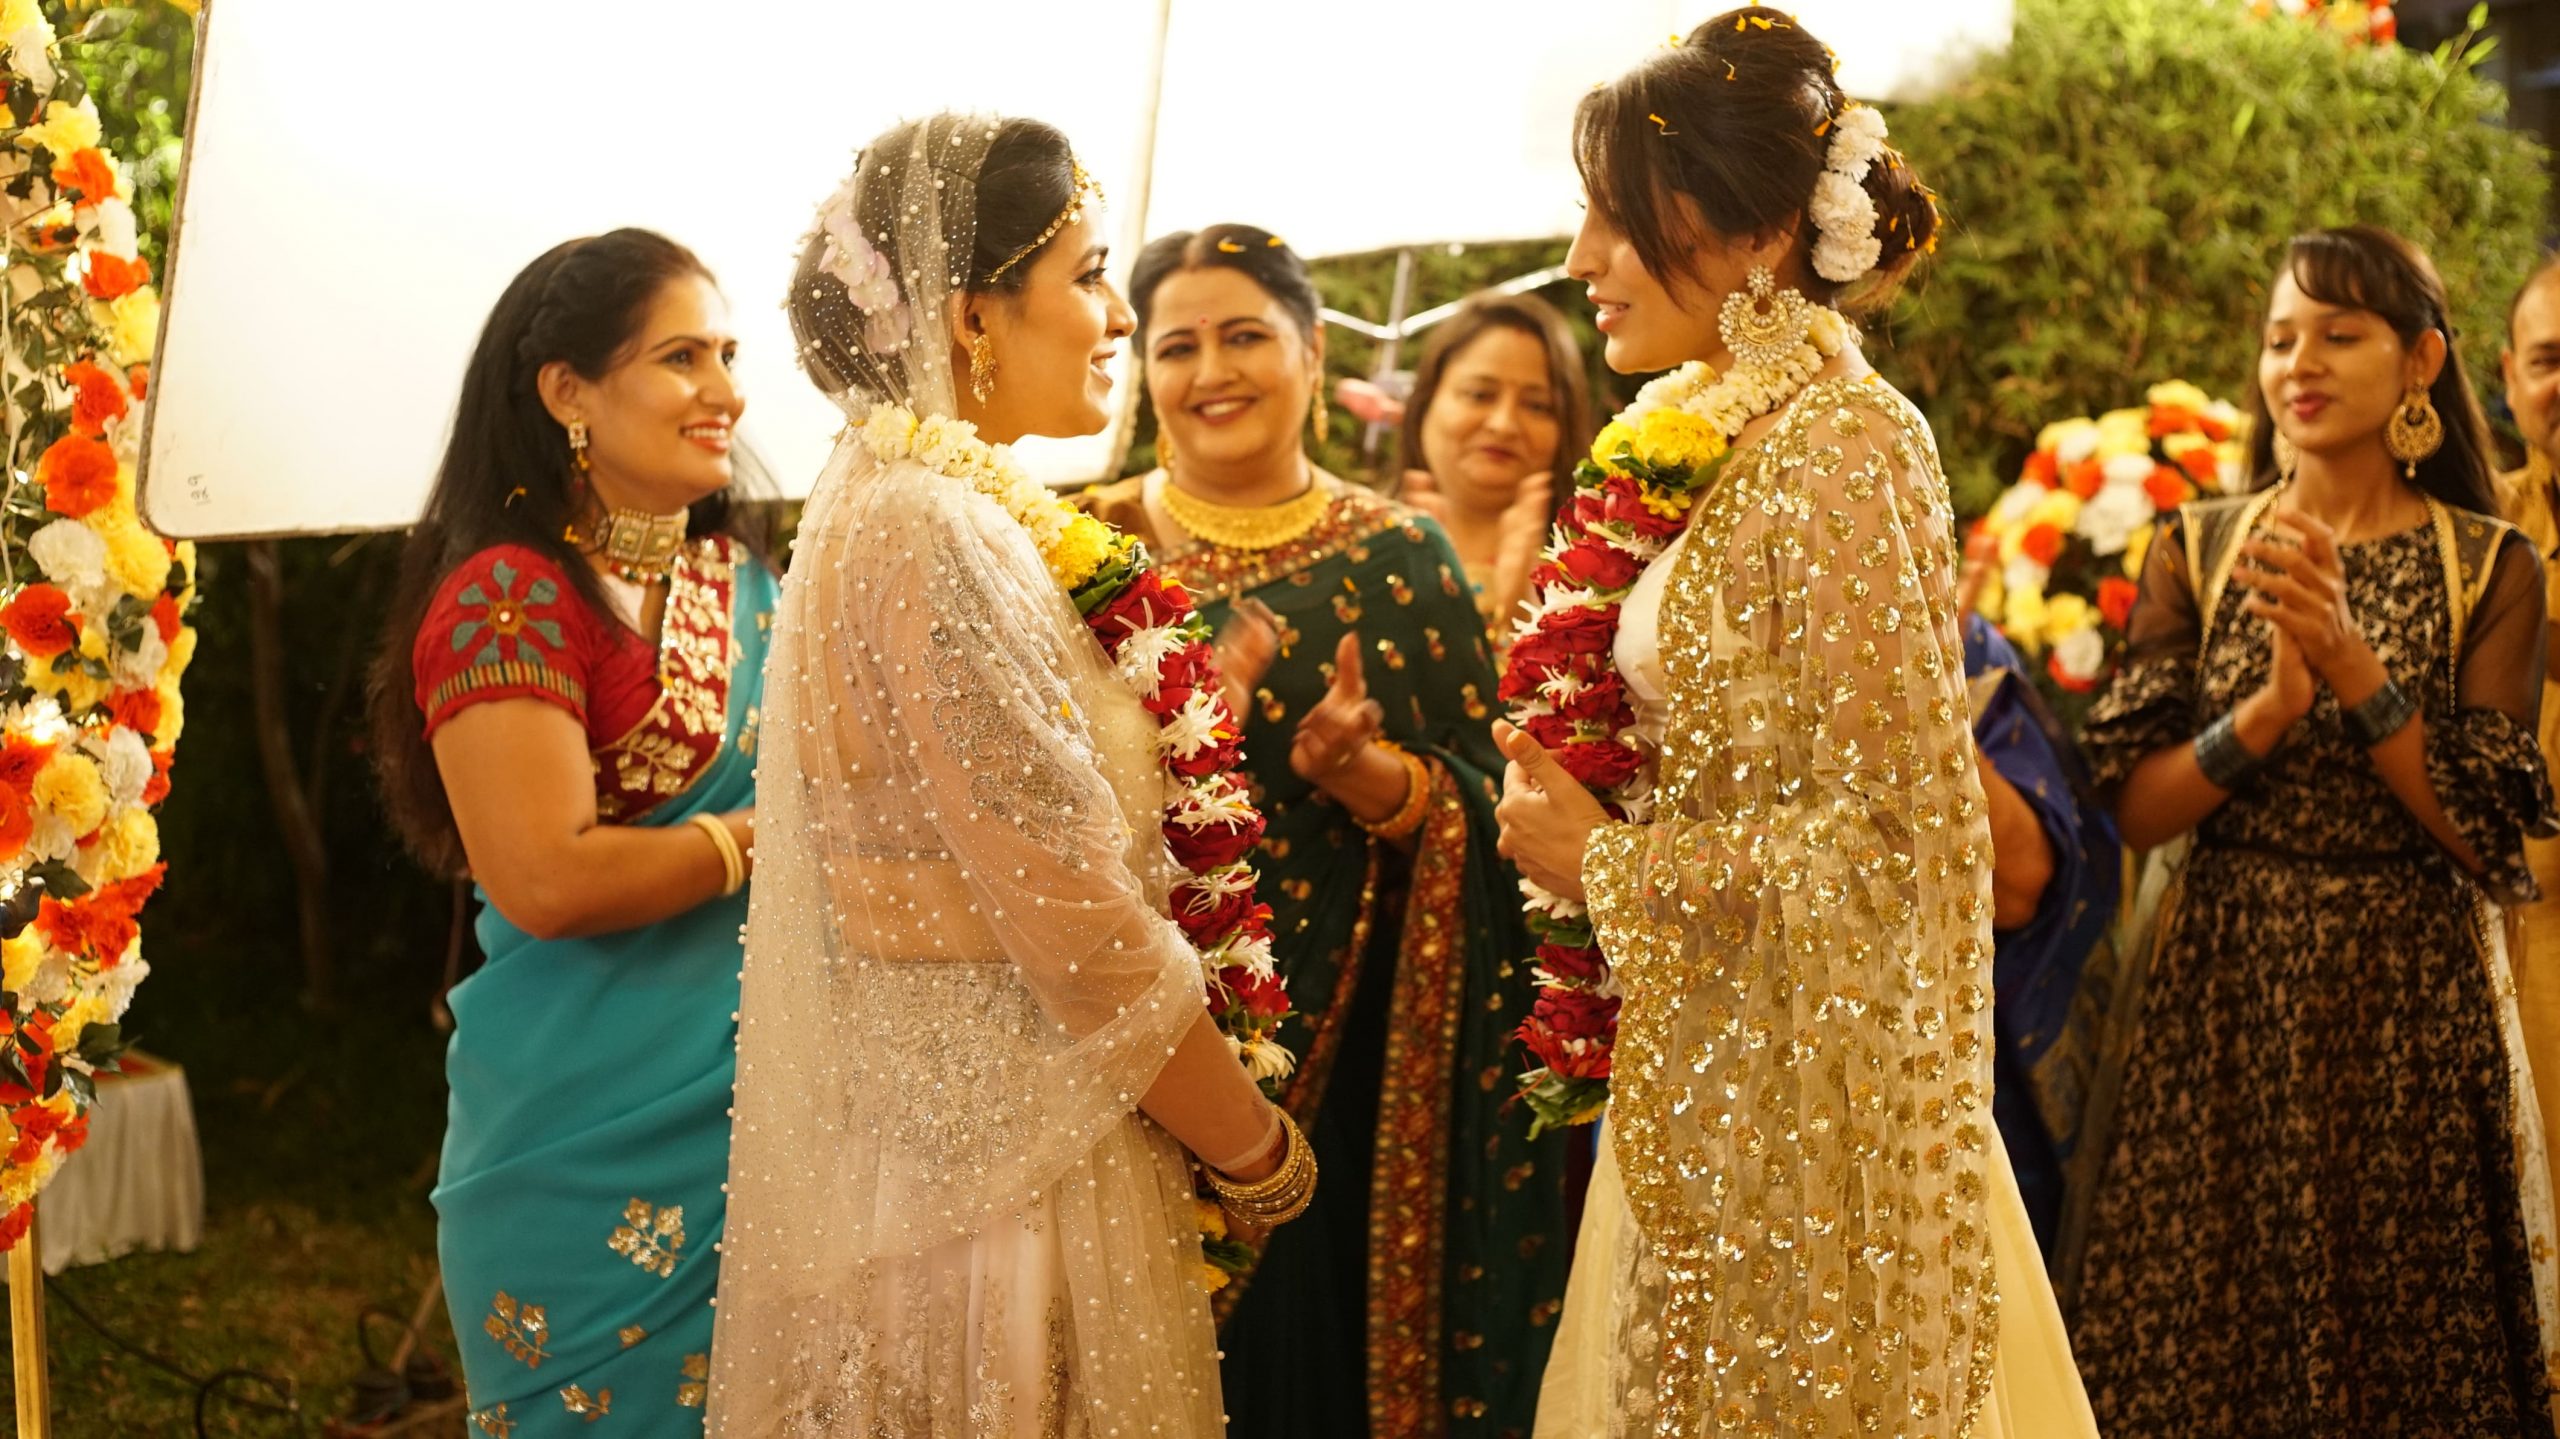 Story- First Lesbian Wedding Sequence on Indian screens